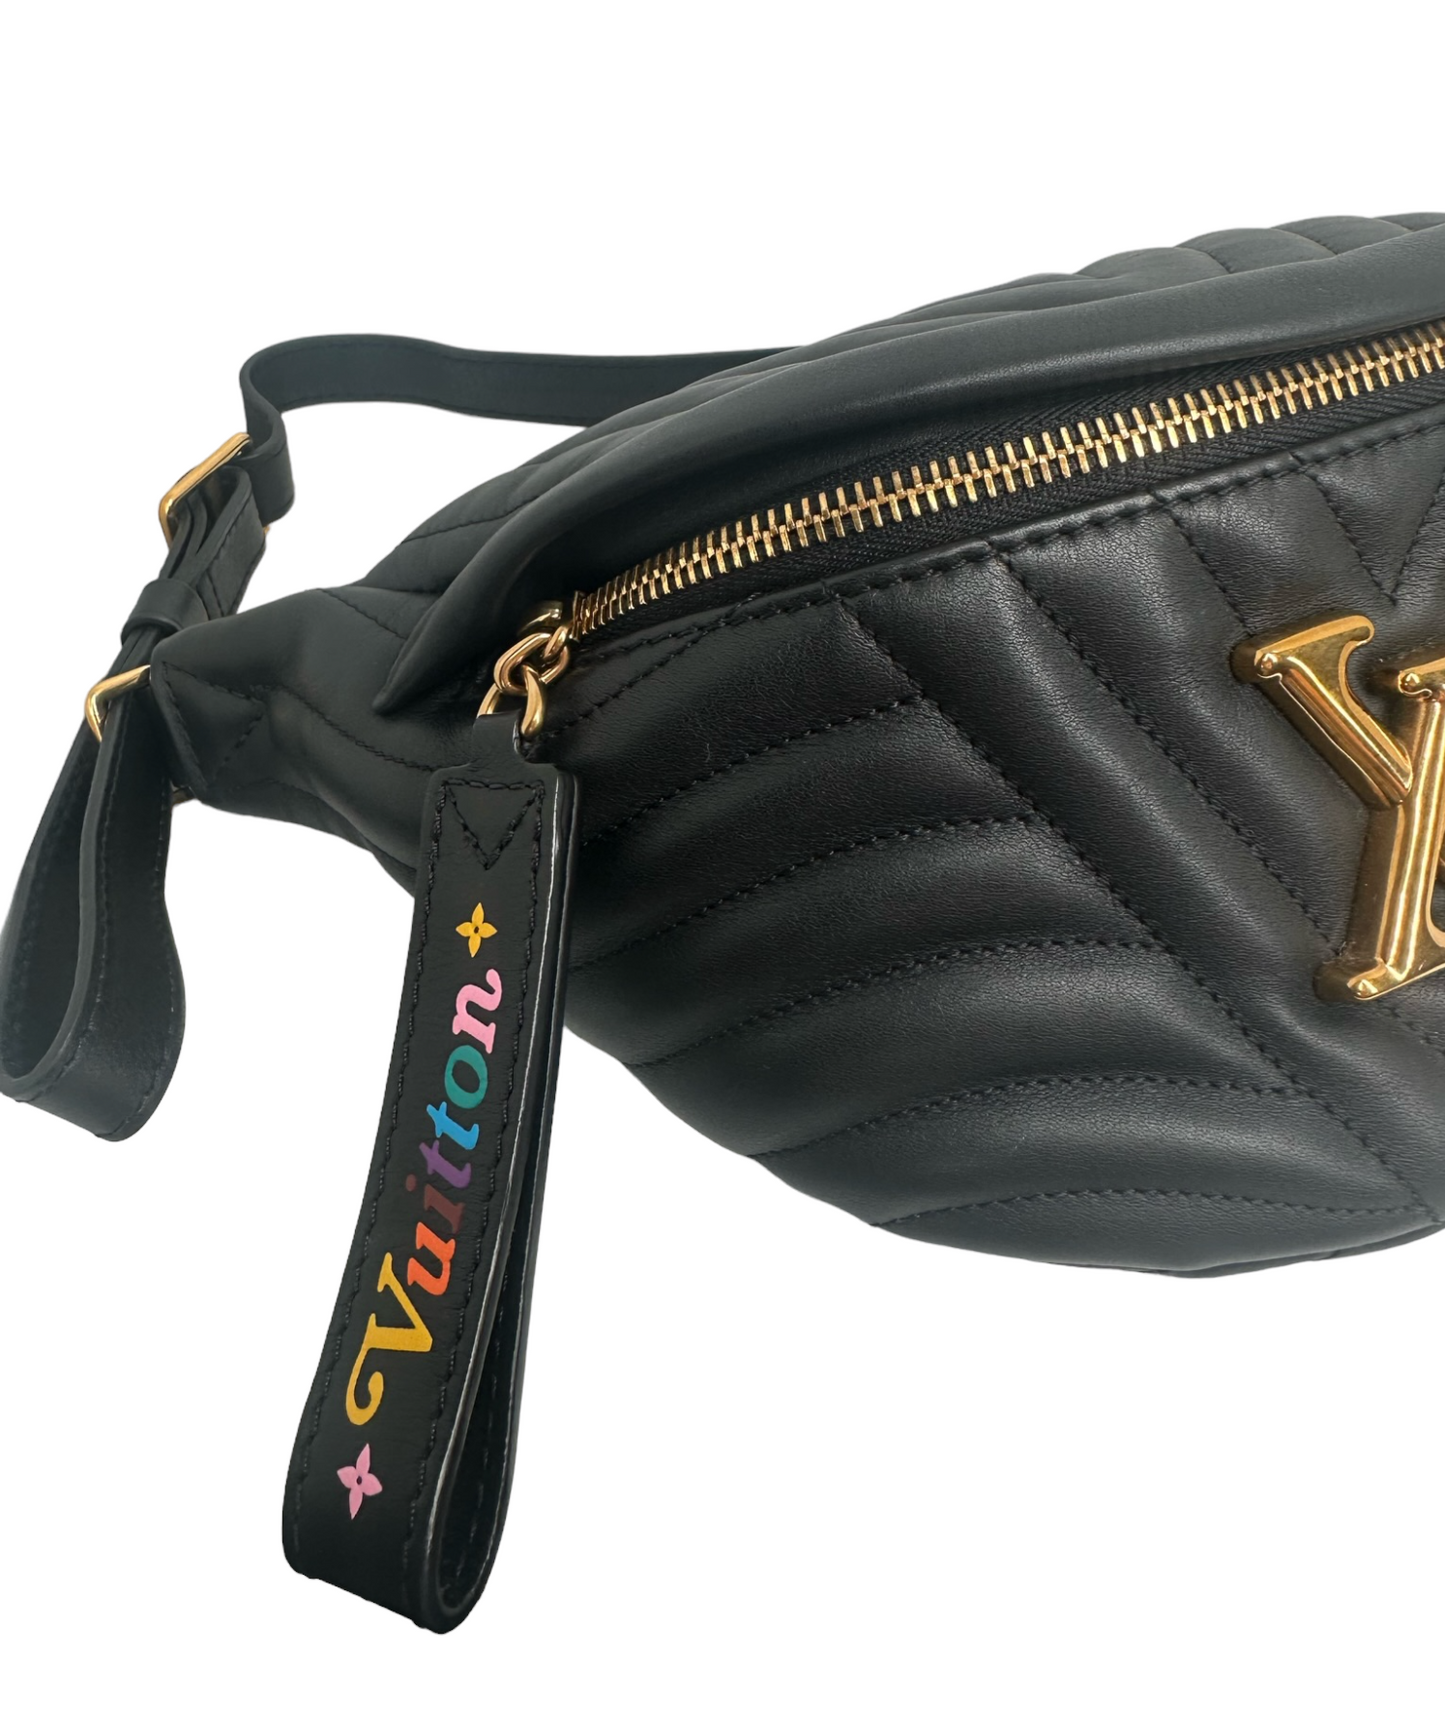 Sold at Auction: A LOUIS VUITTON NEW WAVE BUMBAG